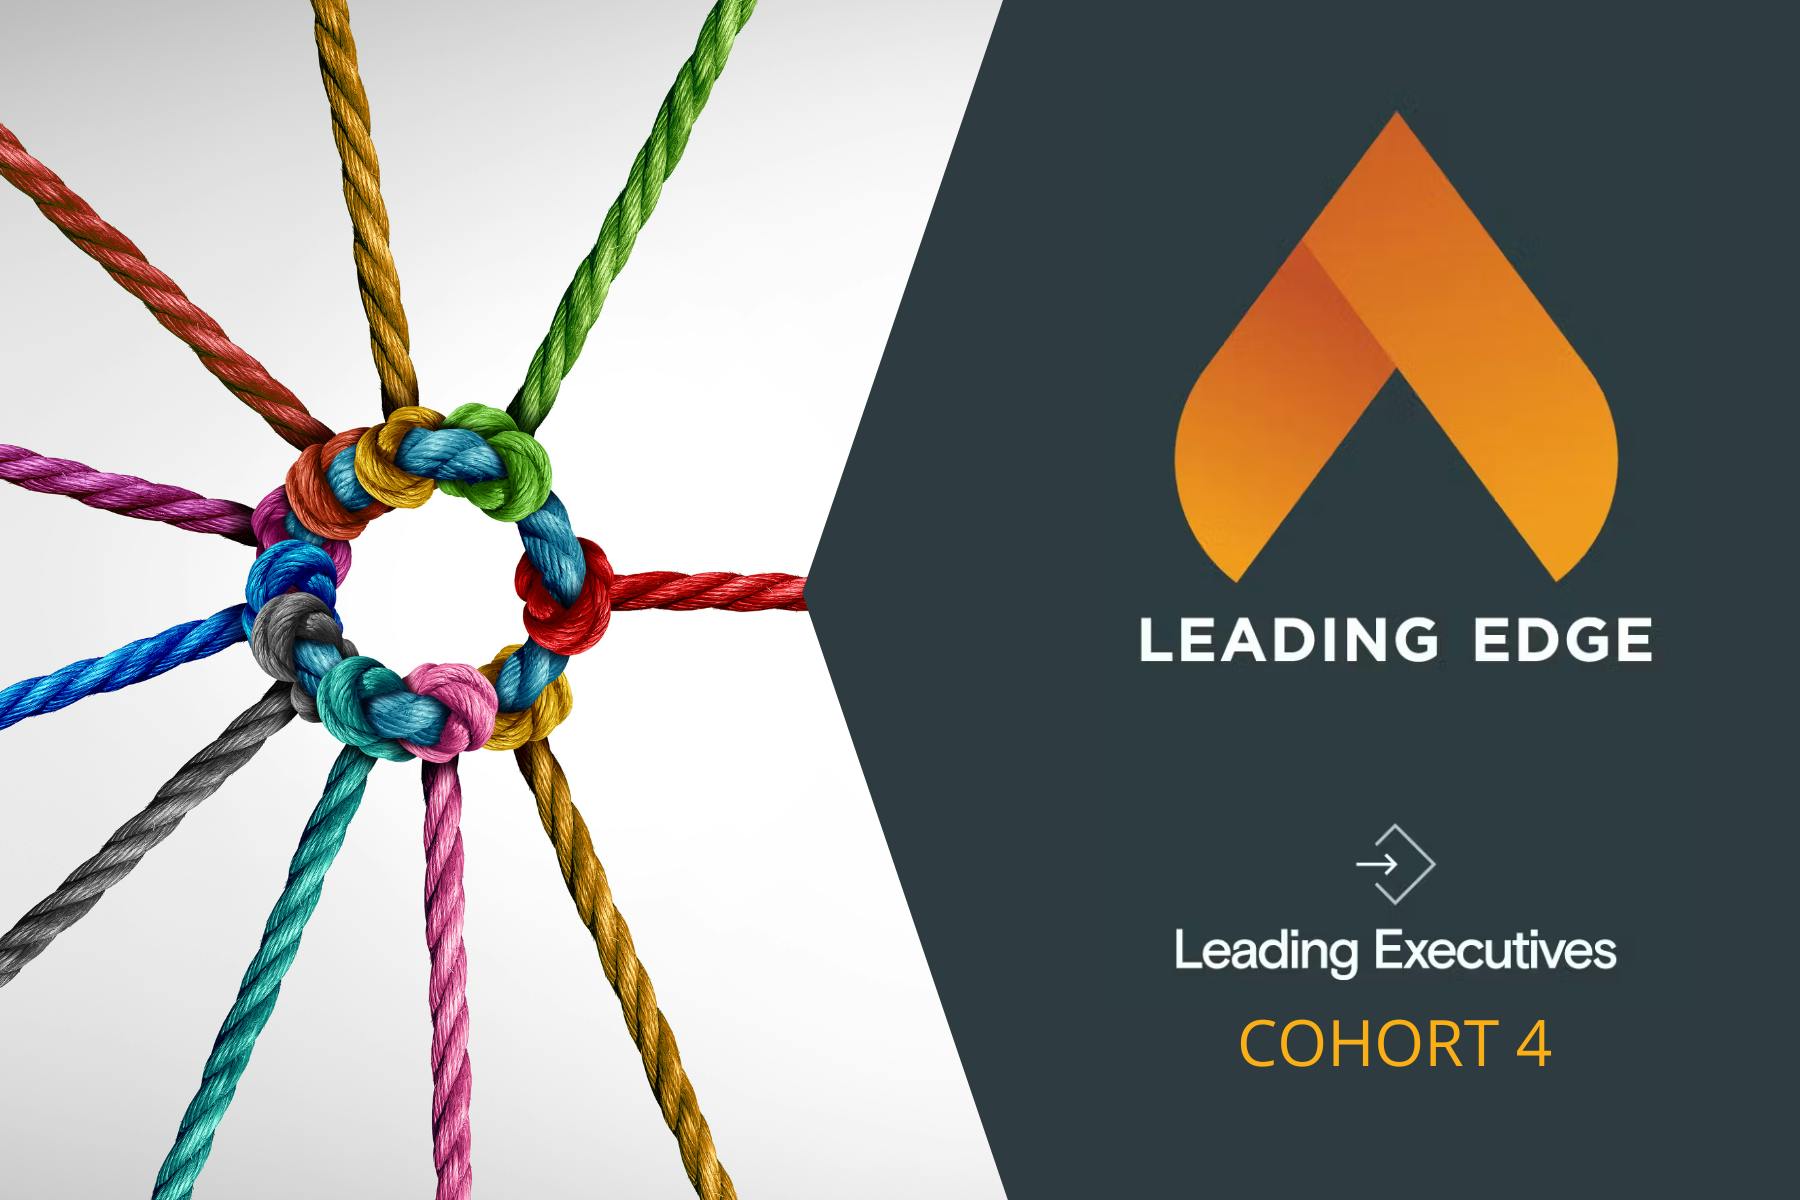 Colorful ropes image overlaid with text (Leading Executives Program Cohort 4)